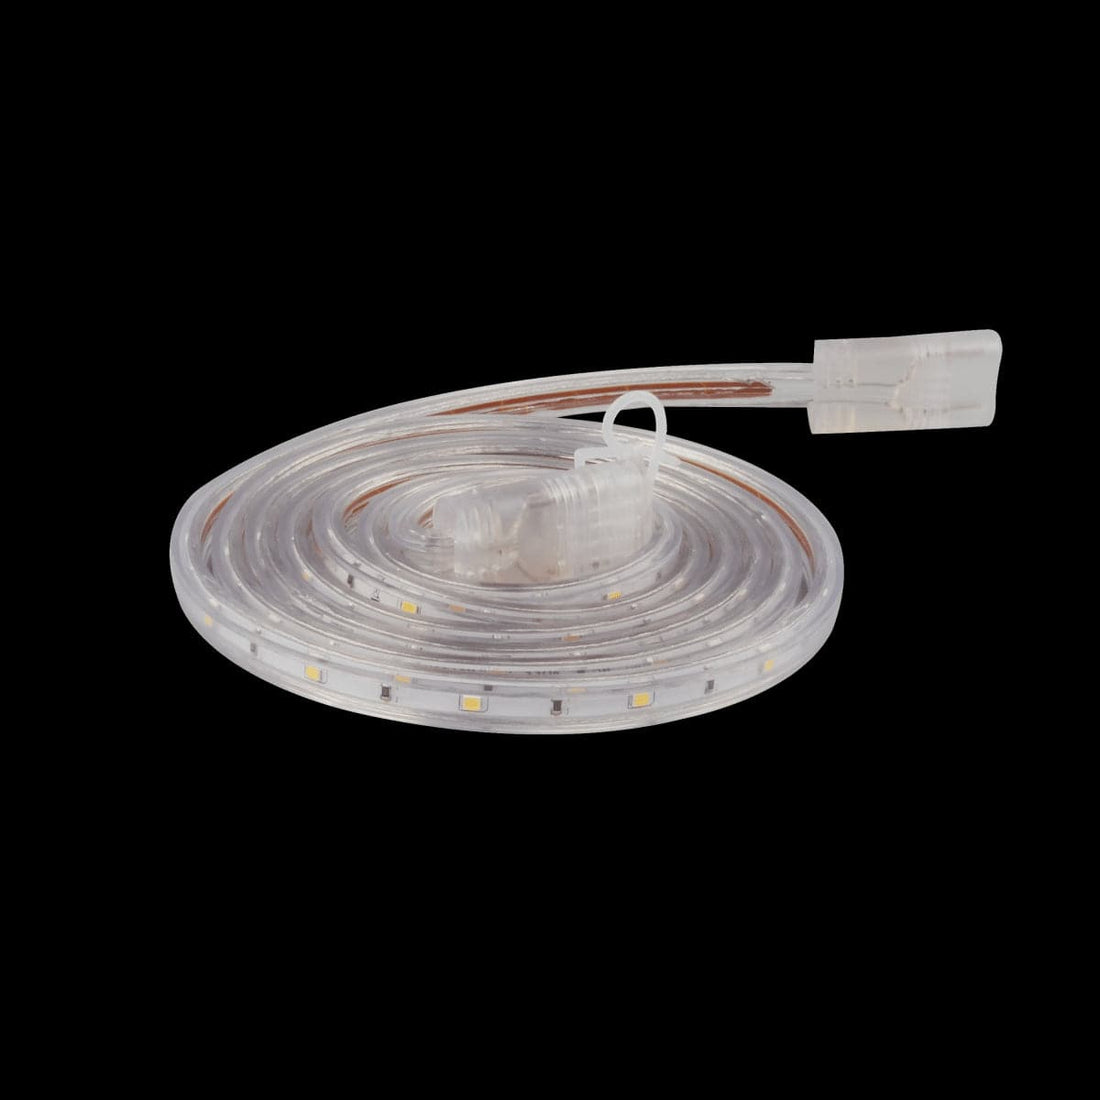 OUTFLEXI LED STRIP KIT 2MT 18W NATURAL LIGHT IP65 - best price from Maltashopper.com BR420005610